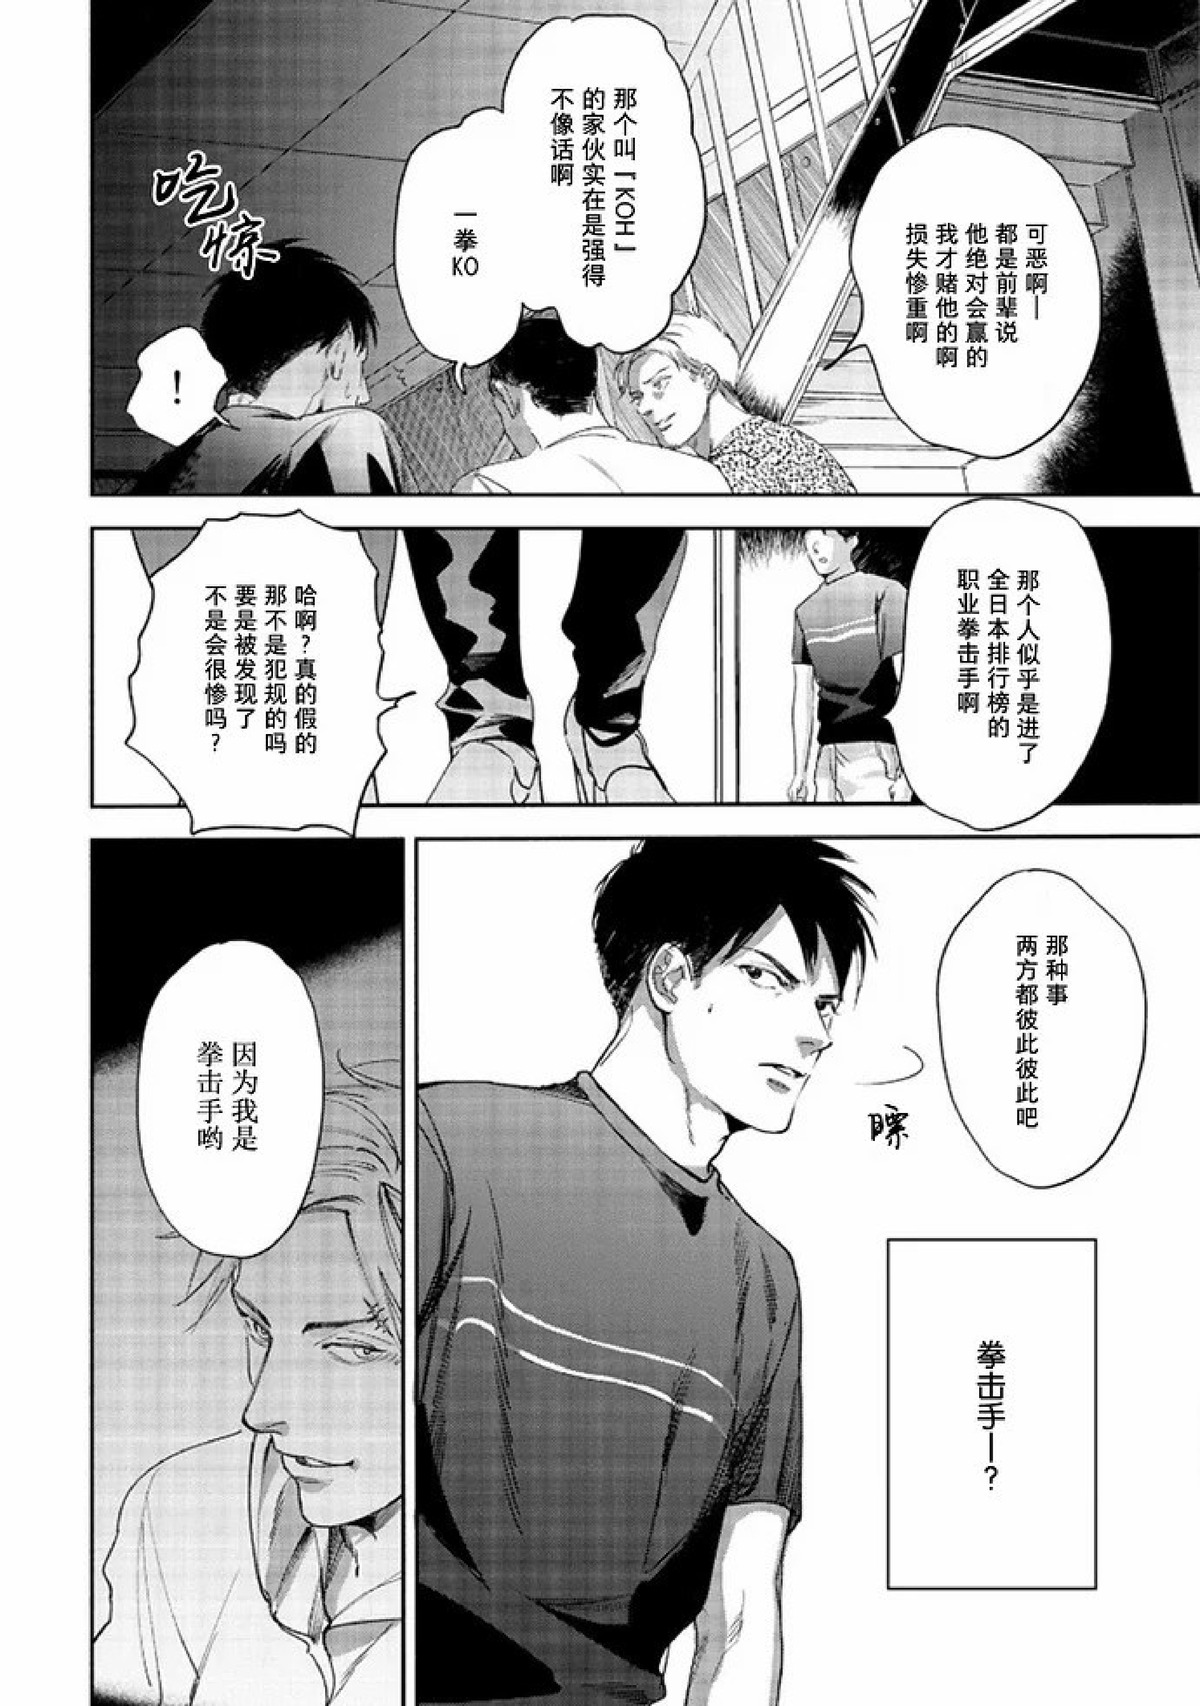 【Two sides of the same coin[腐漫]】漫画-（上卷01-02）章节漫画下拉式图片-50.jpg